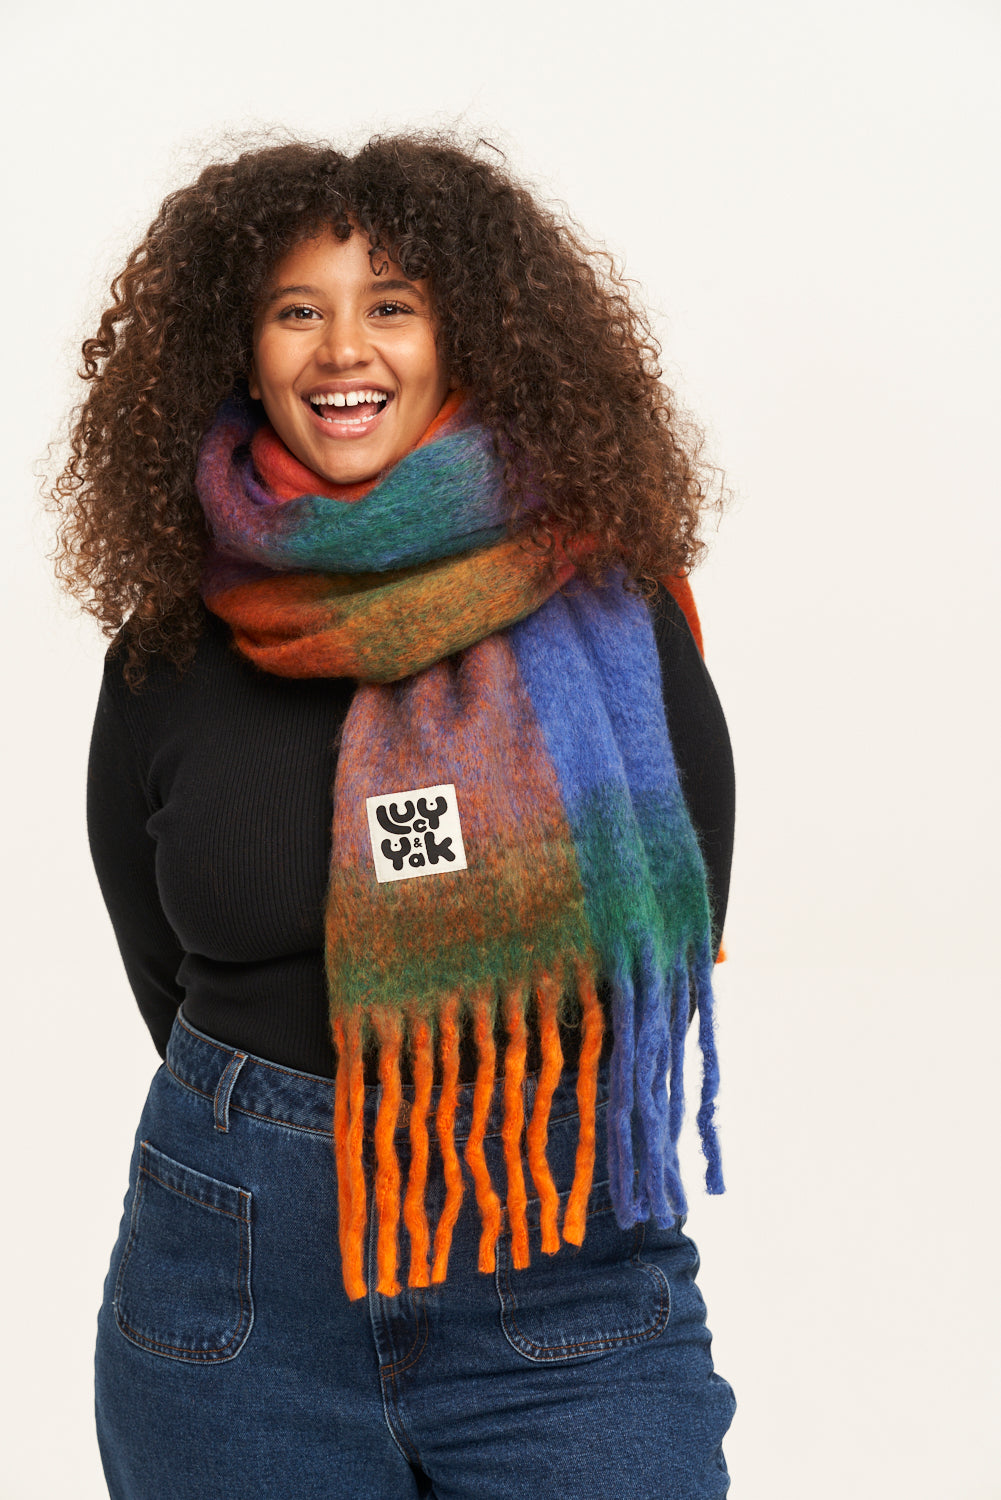 Rowan Scarf: RECYCLED POLYESTER - Multi Check